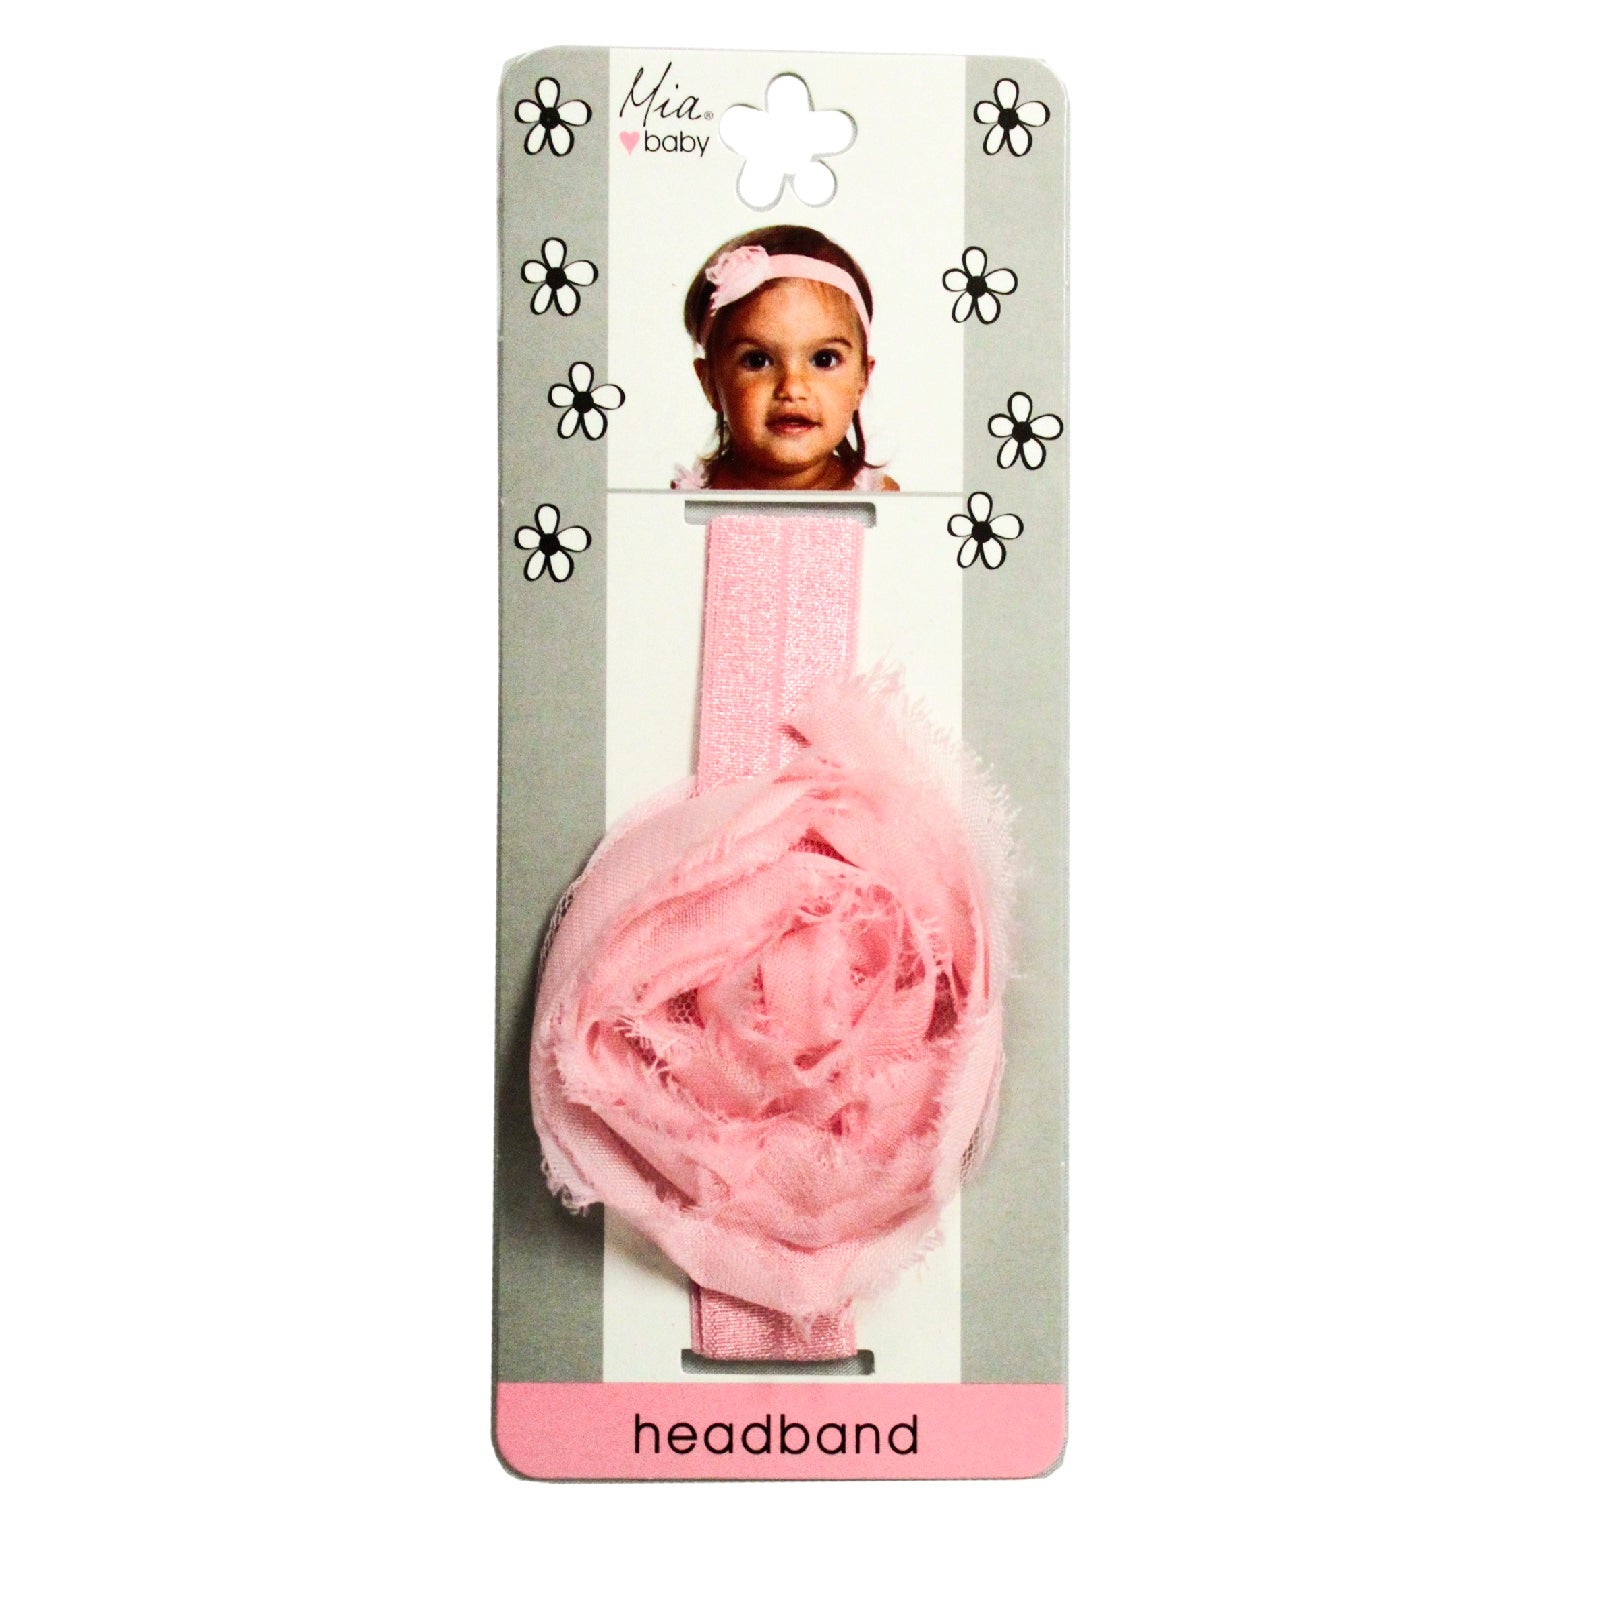 Mia® Baby Headband Organza Rosette Flower - white band with hot pink flower - shown on packaging - invented by #MiaKaminski #MiaBeauty #Mia #Beauty #Baby #hair #hairaccessories #hairclips #hairbarrettes #love #life #girl #woman